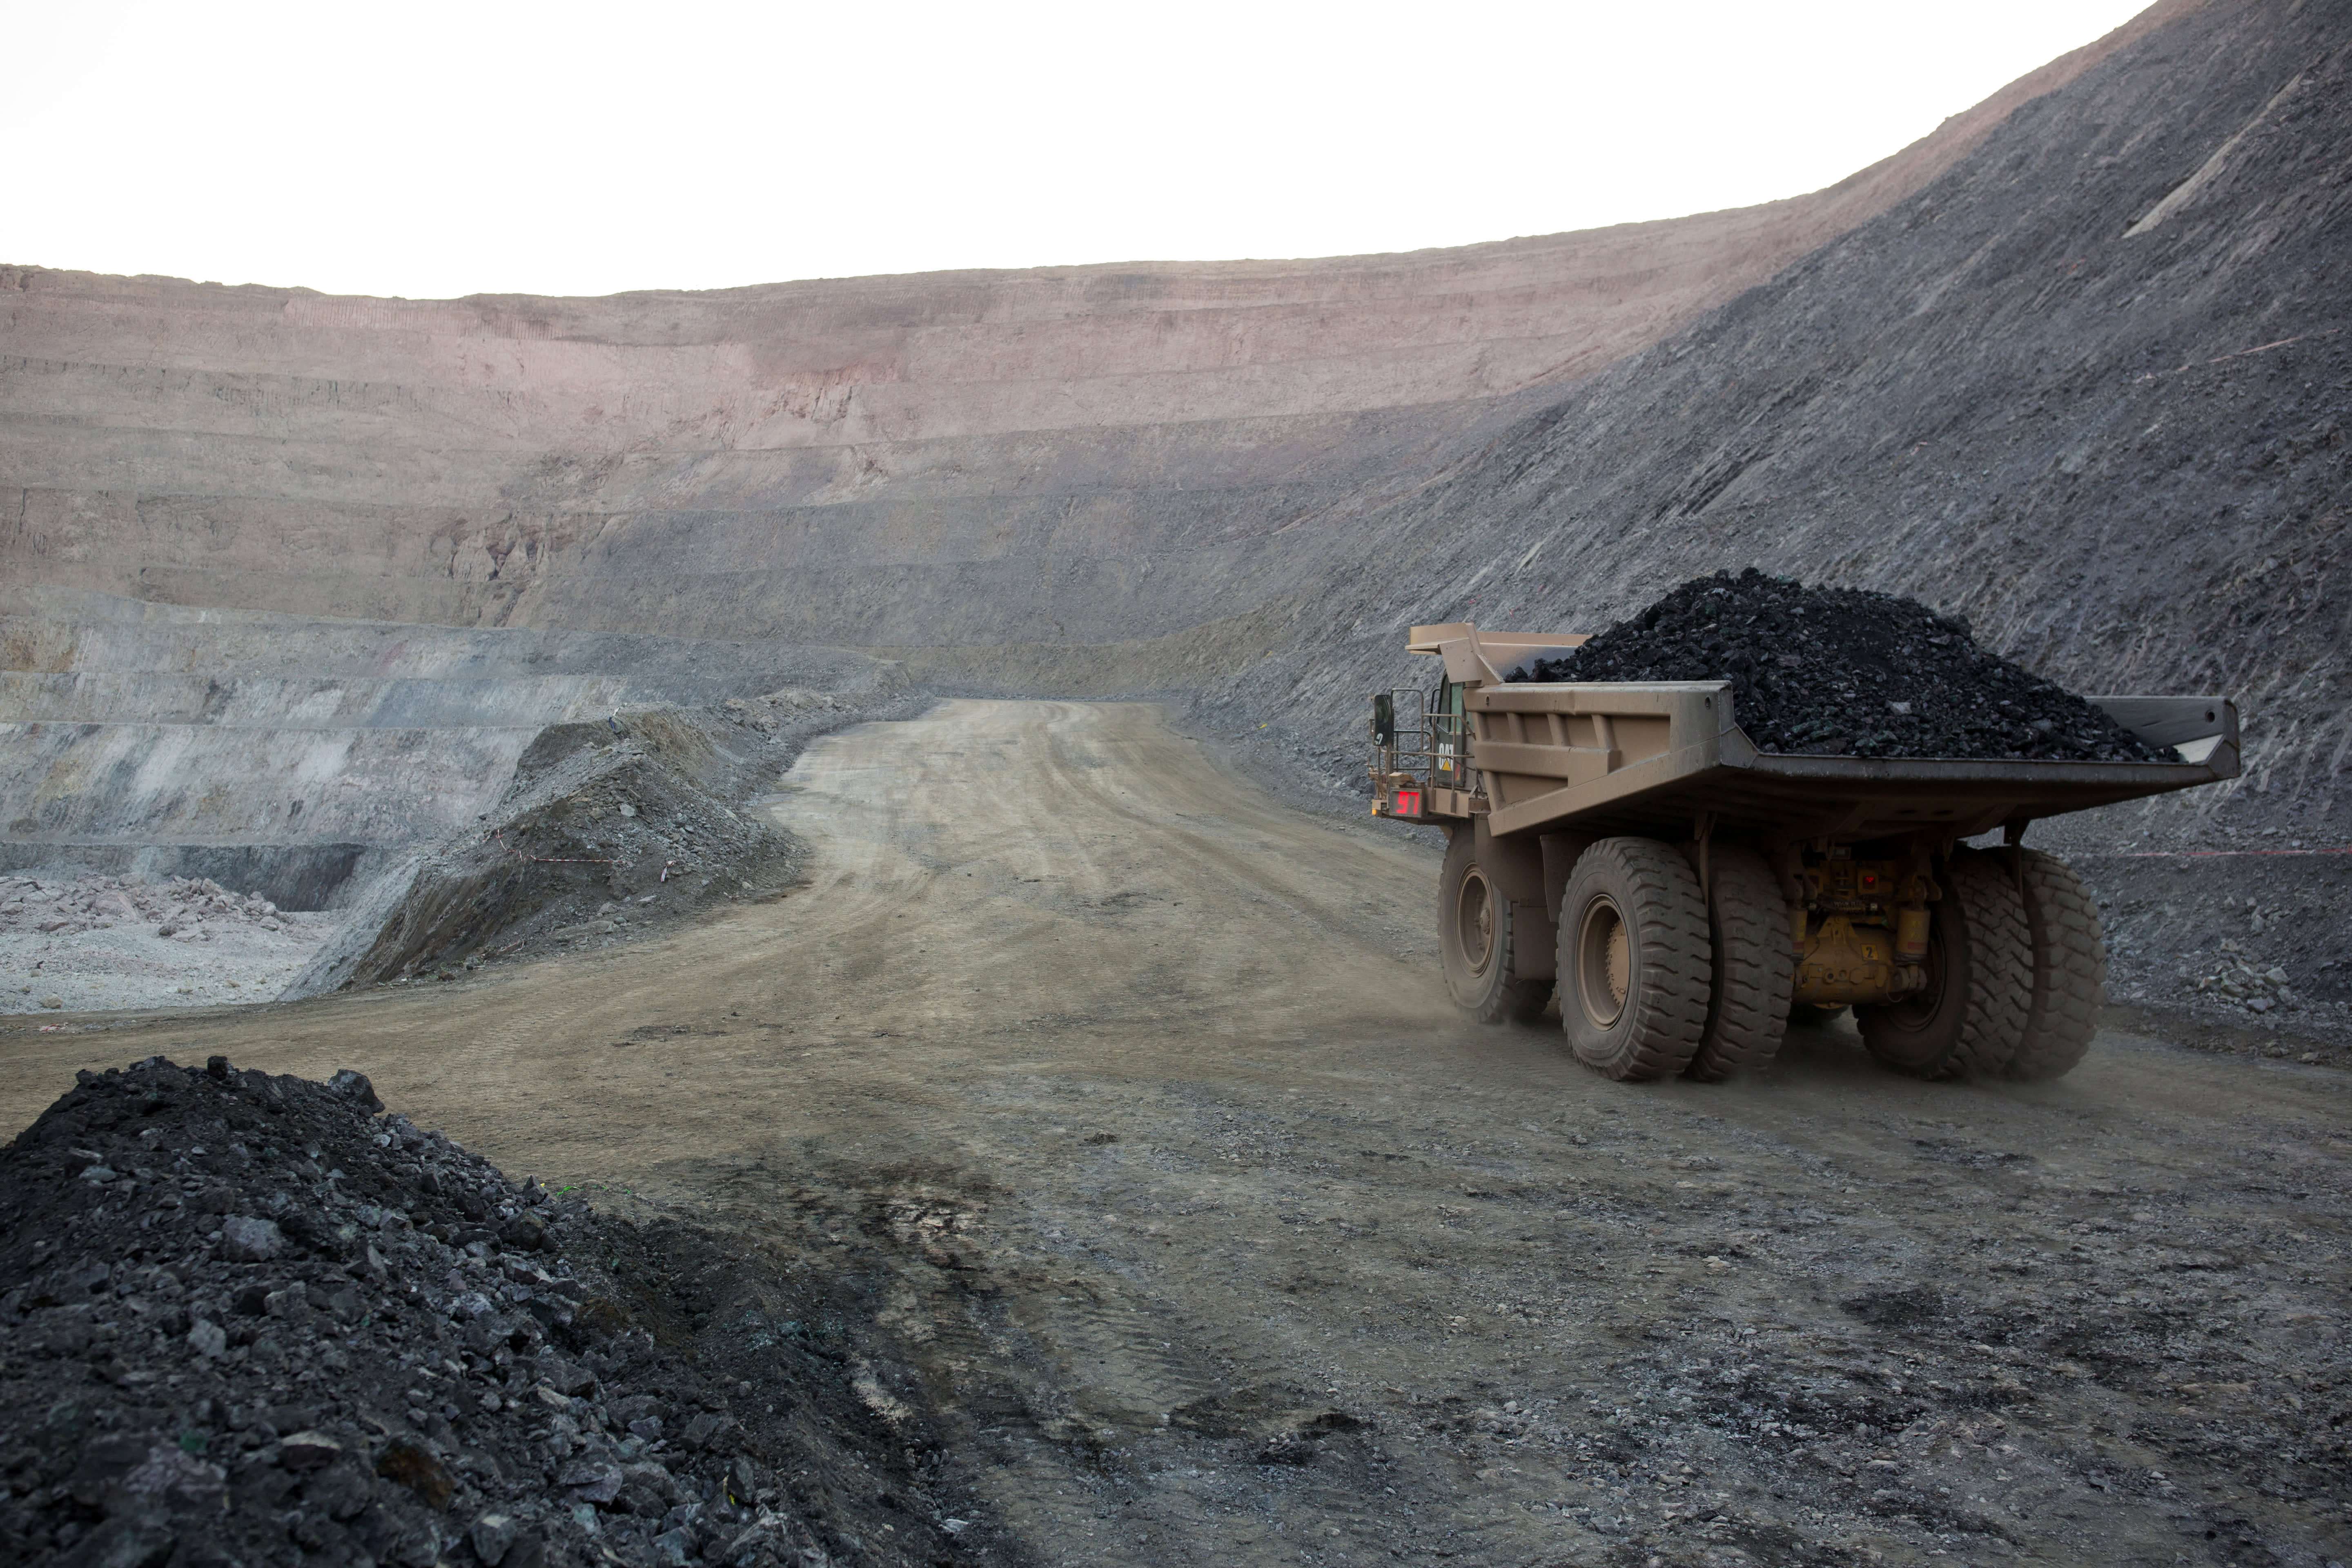 Nationalism over natural resources is on the rise;  Miners could suffer